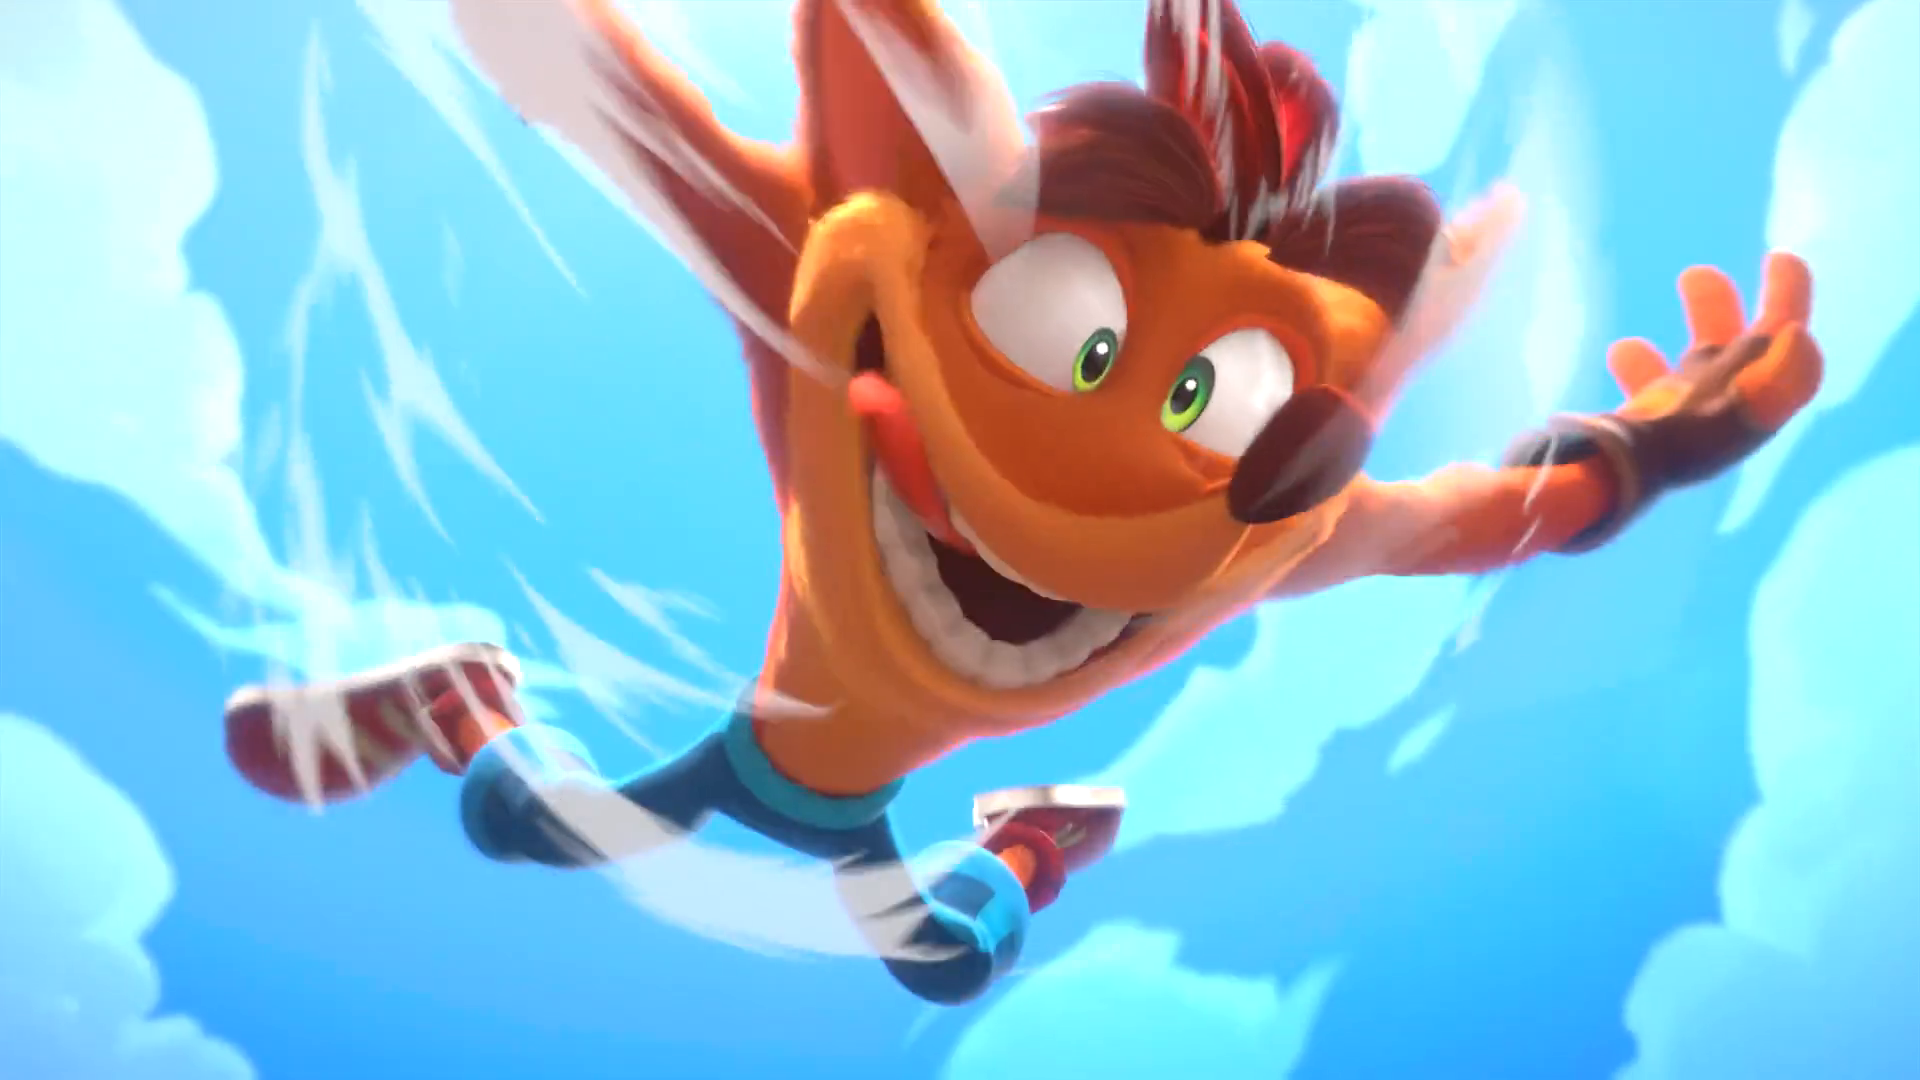 Crash Team Rumble introduces us to its game with a frantic intro